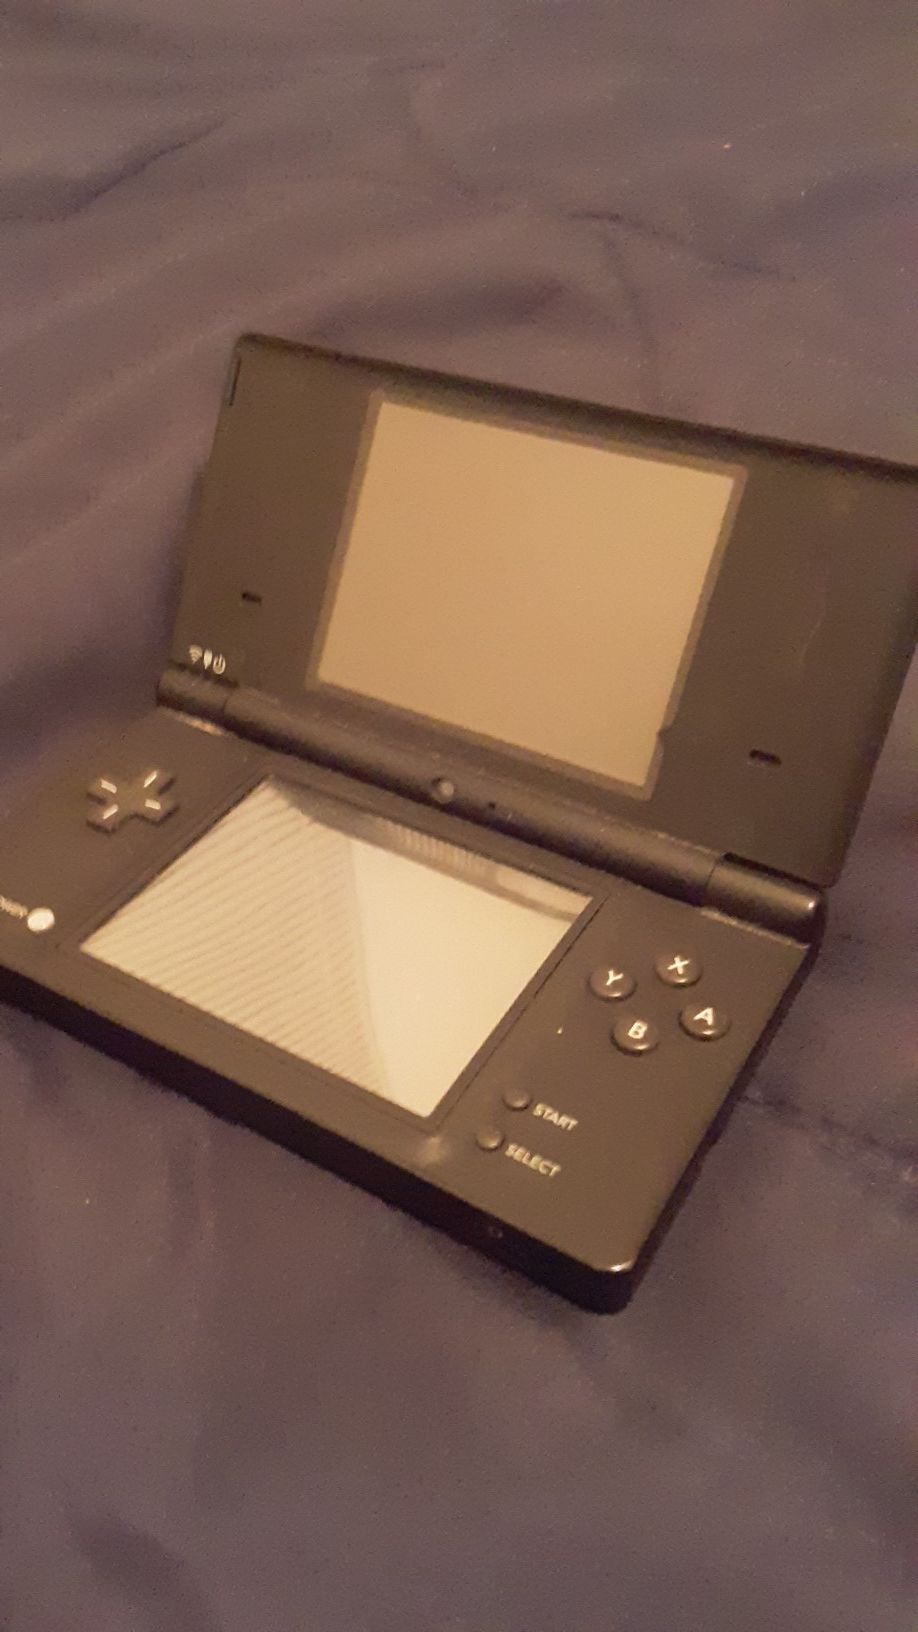 Black dsi with case and games